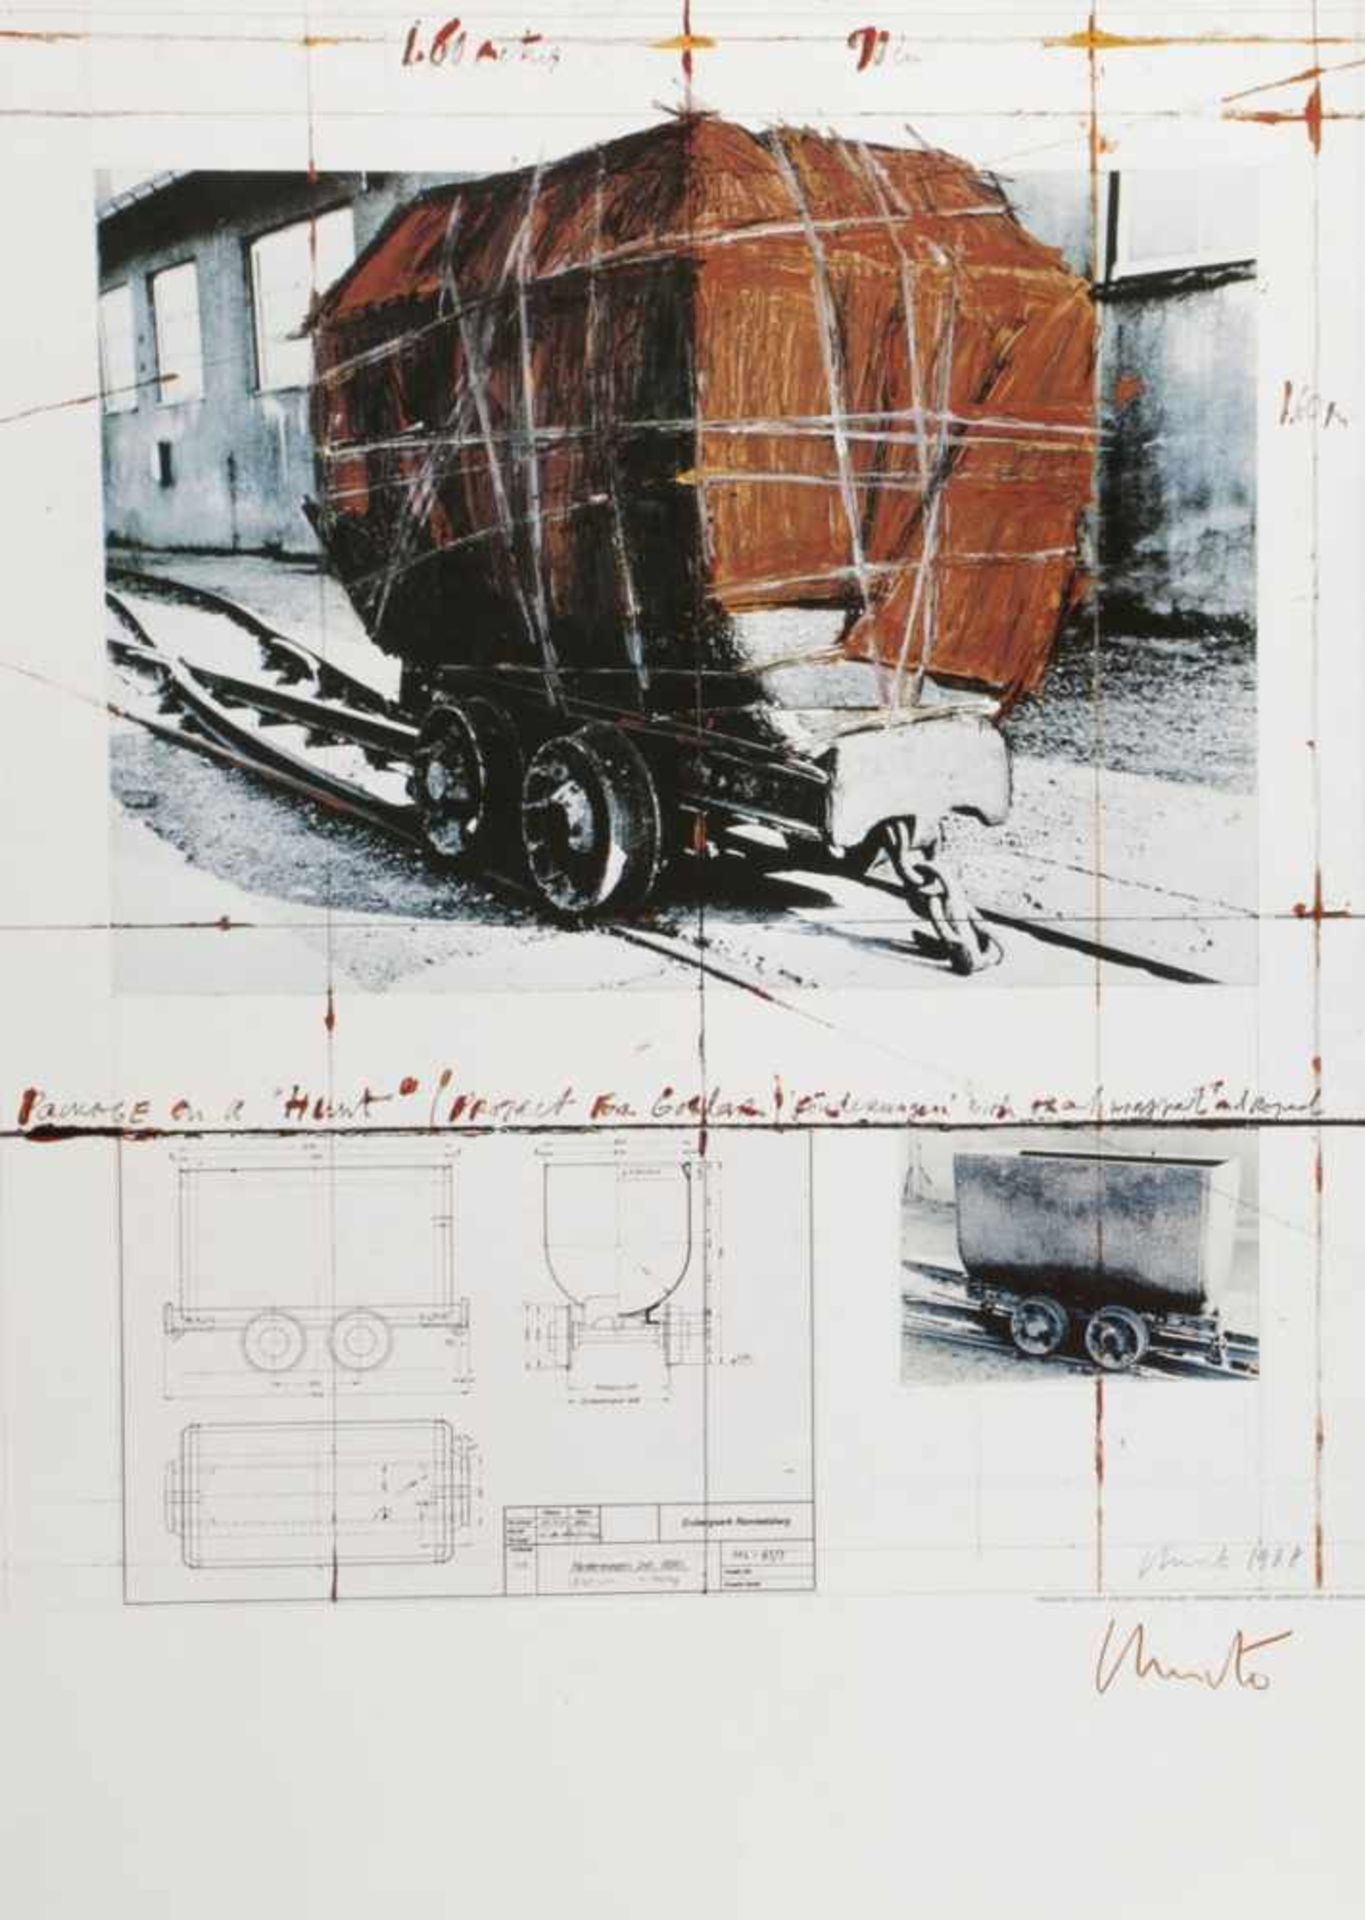 Christo1935 Gabrovo, Bulgarien - lebt und arbeitet in New York - "Package on a hunt" (Project for